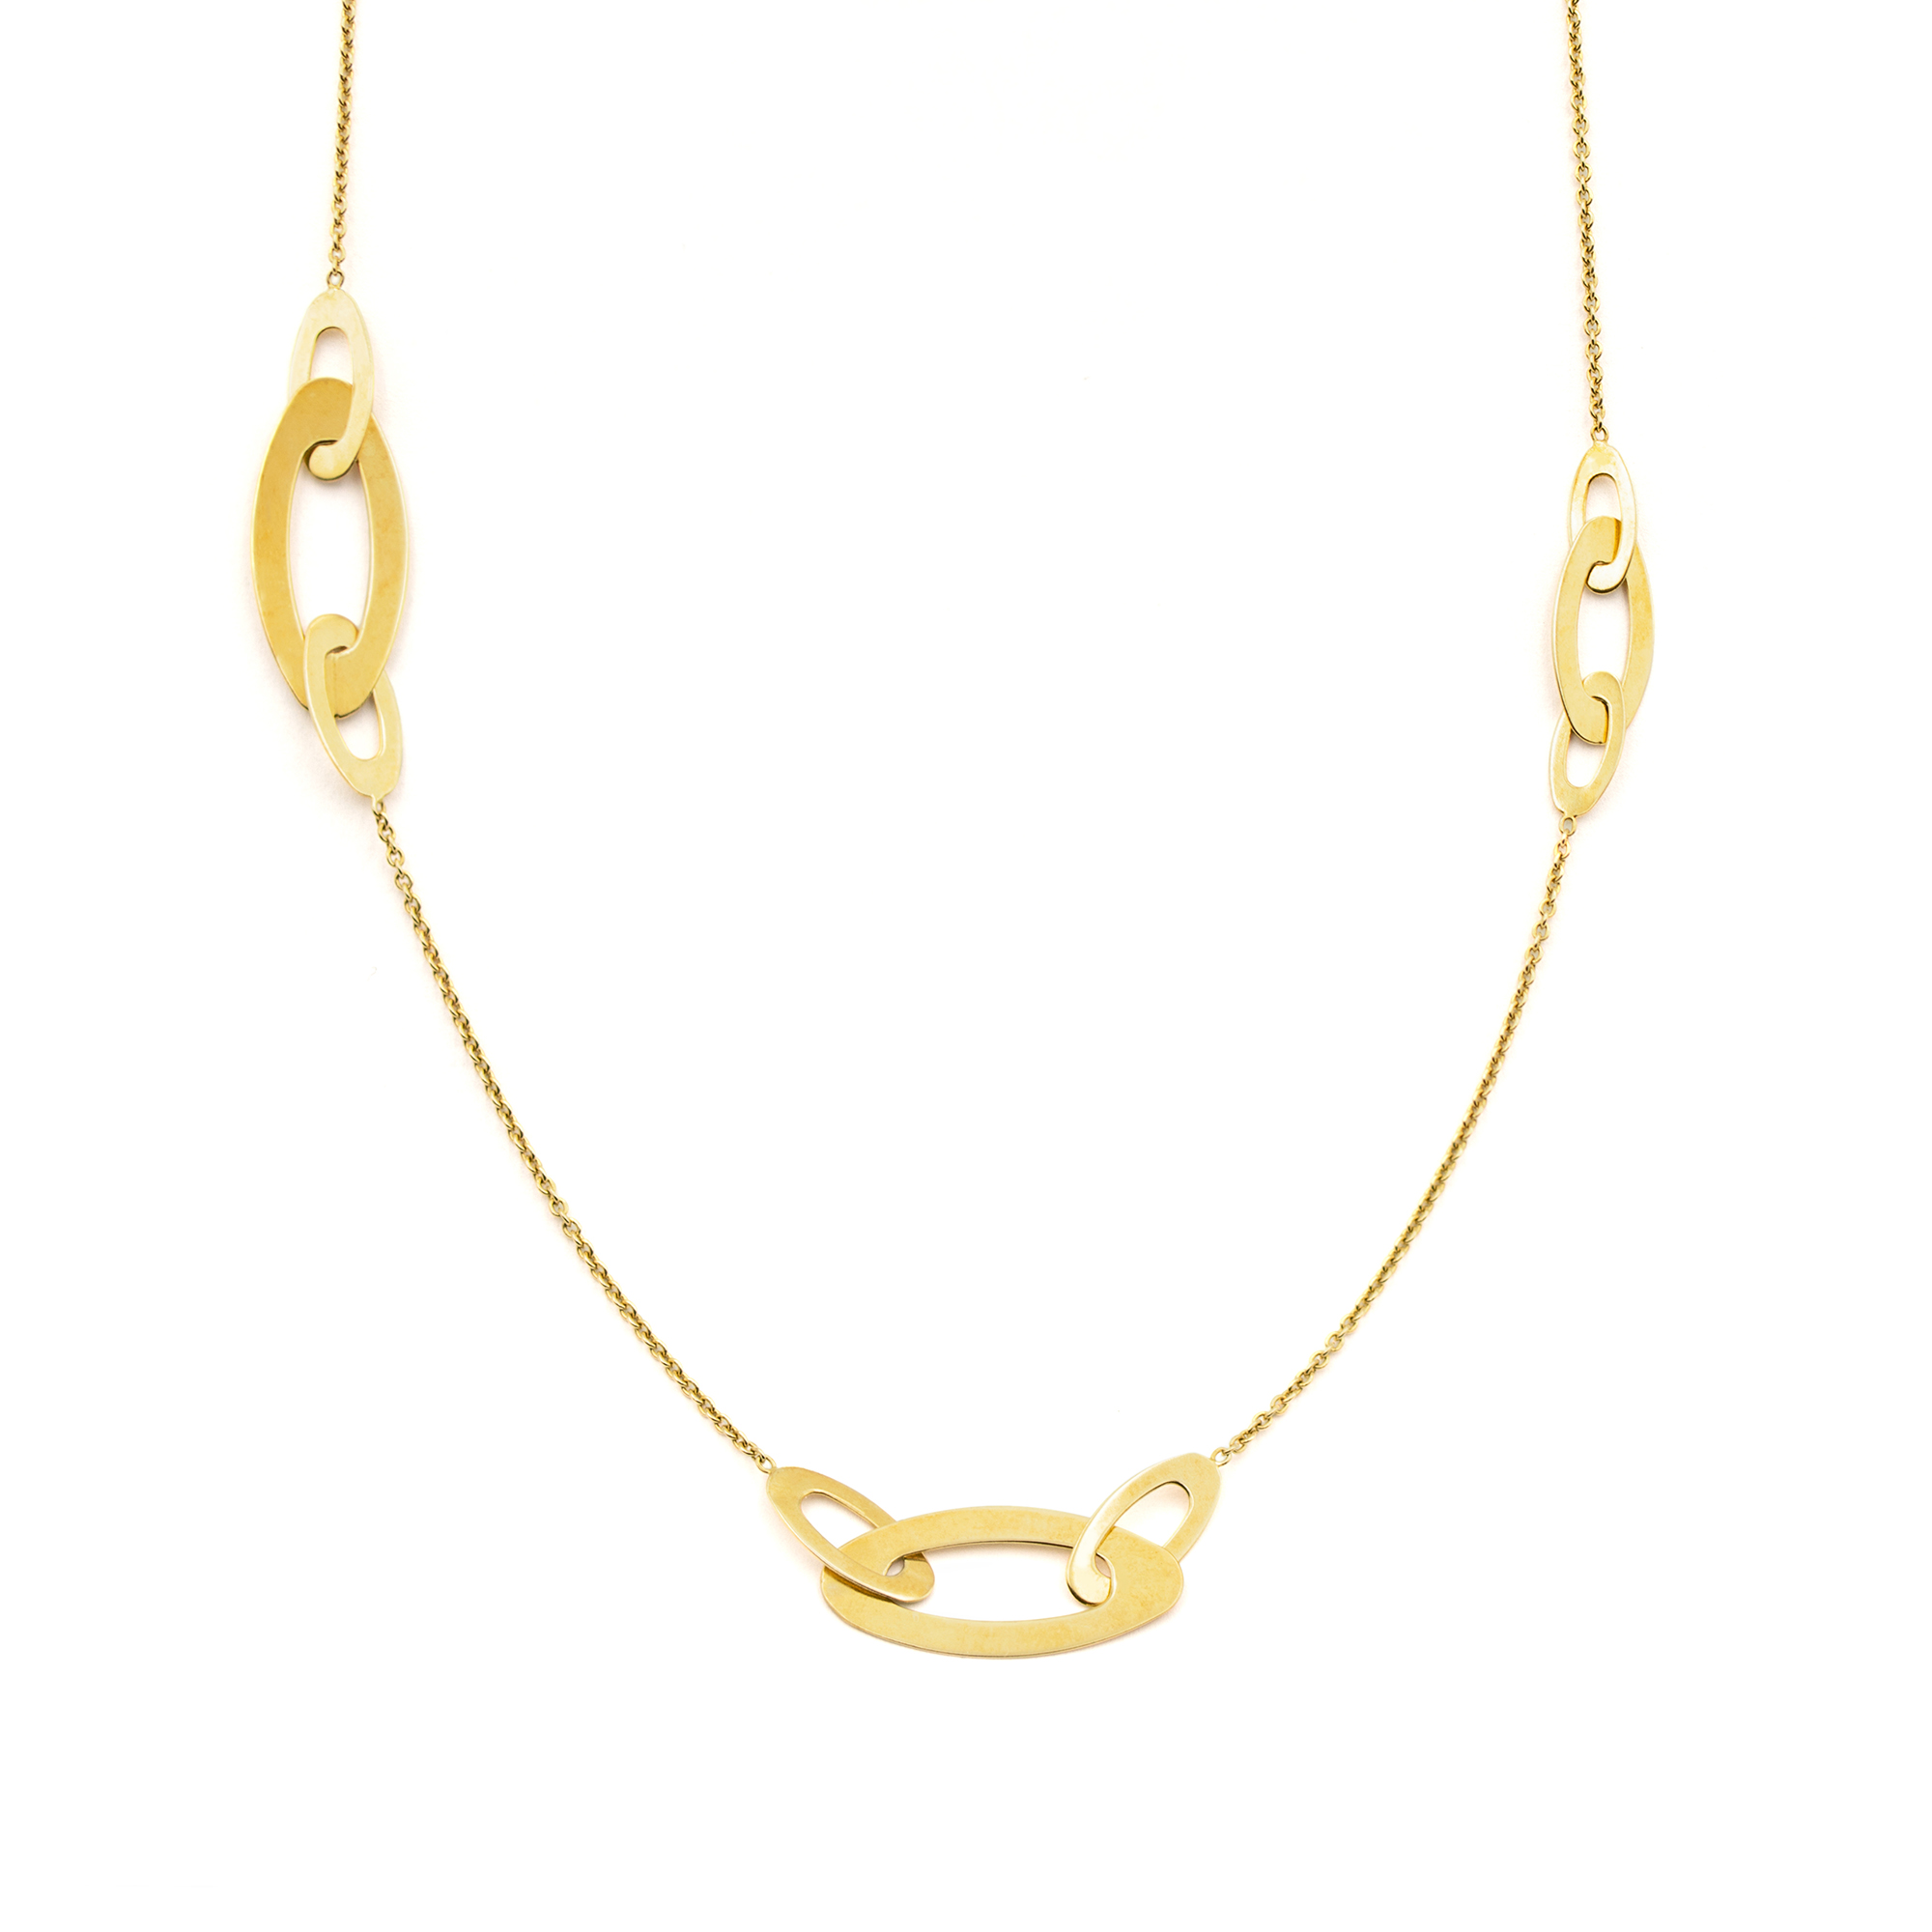 Roberto Coin Layered Diamond Station Necklace | Nordstrom